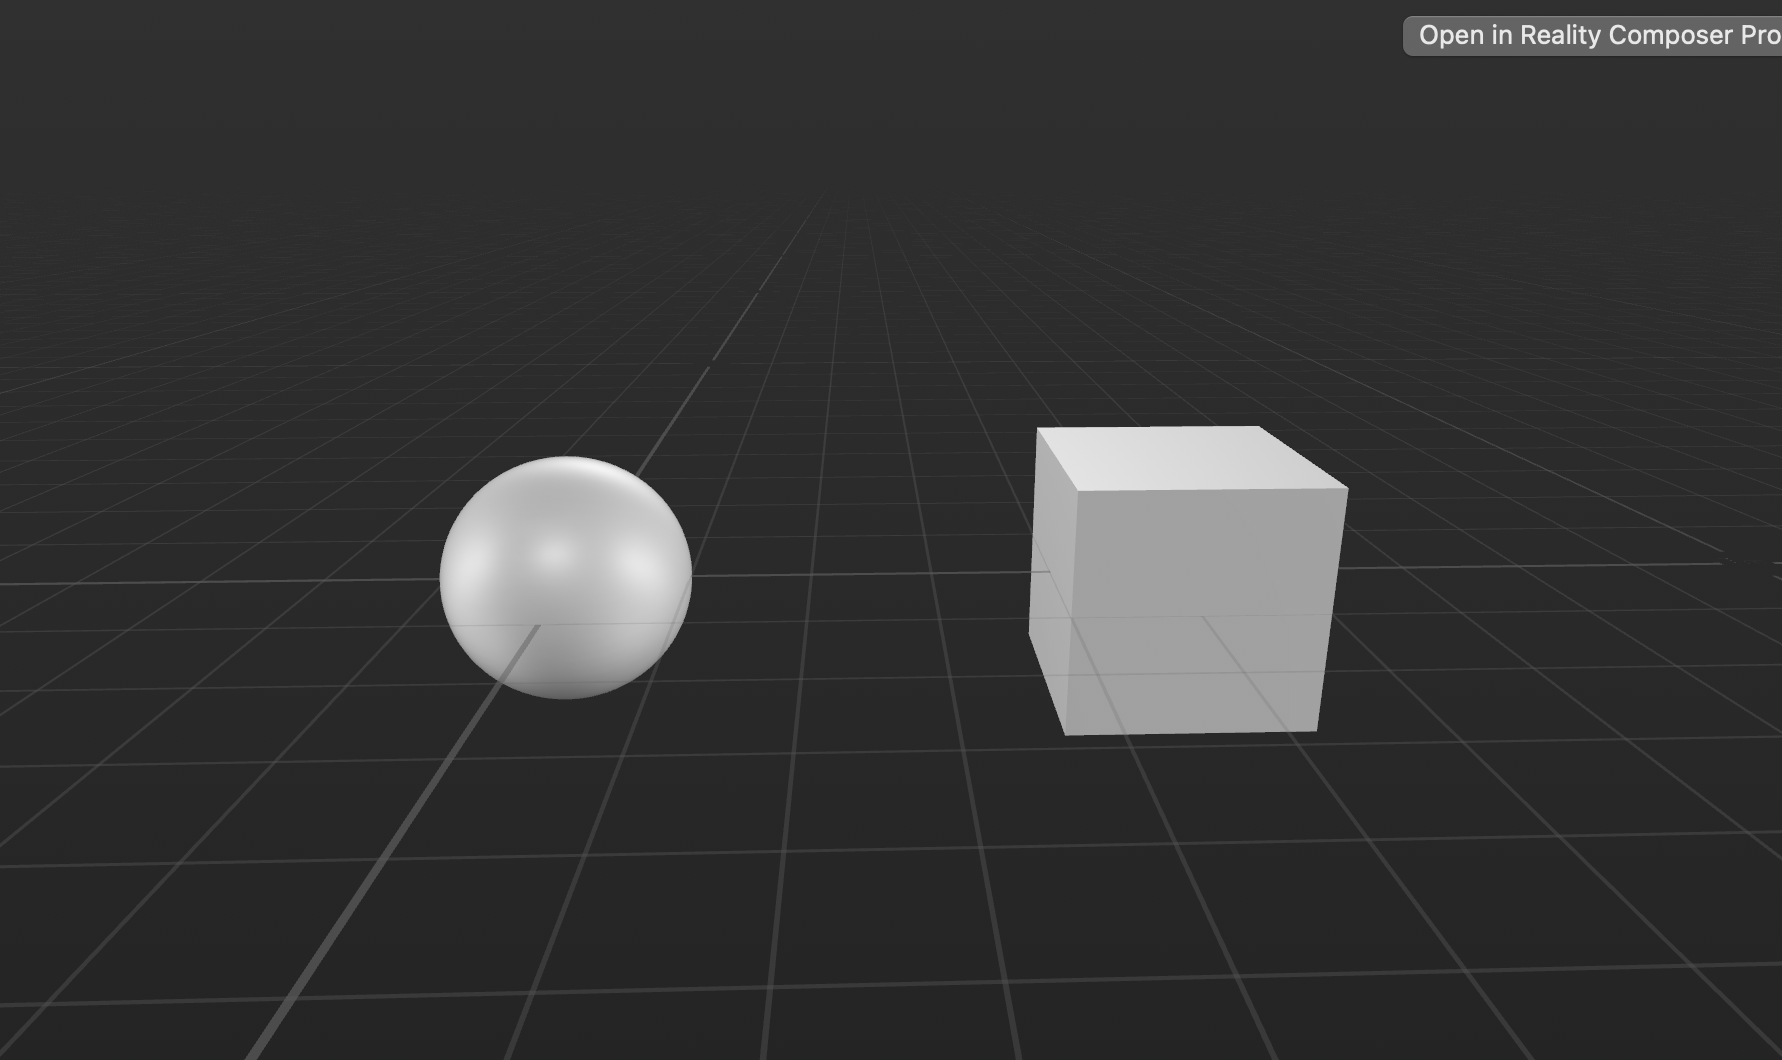 a sphere on the left, and cube on the right, the cube is placed 50cm to the right, and both are in a single scene.